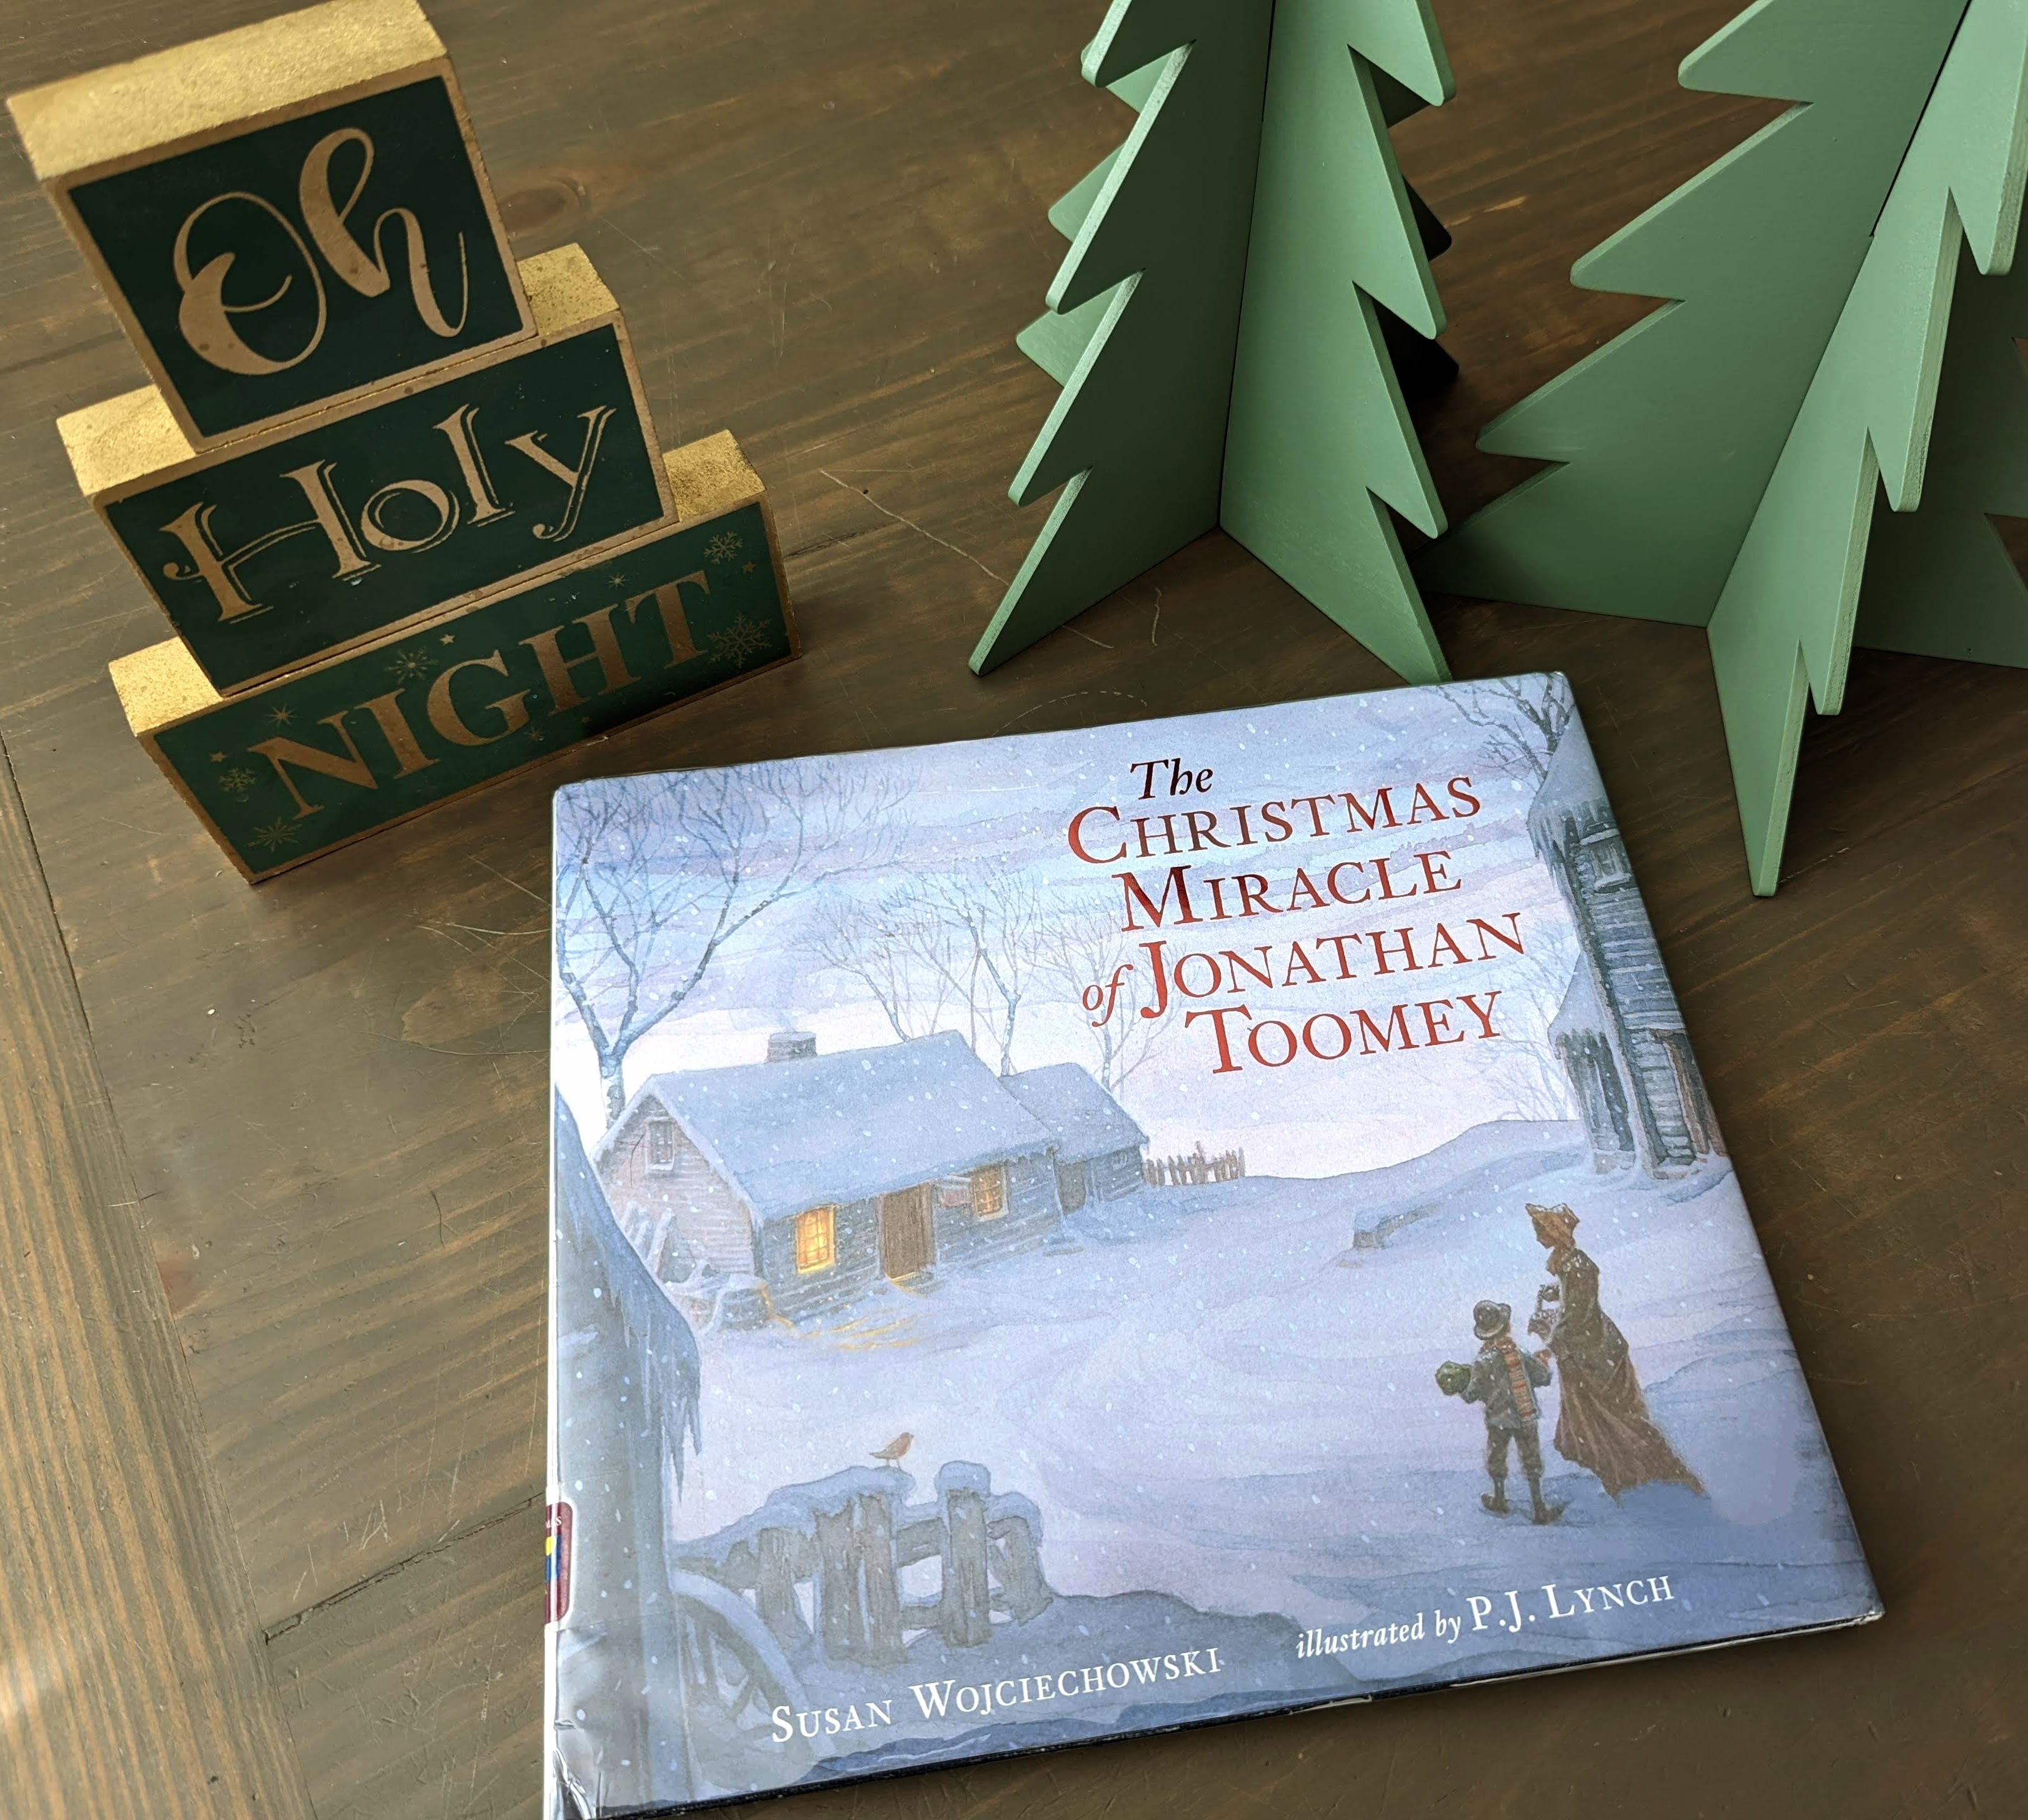 The Christmas Miracle of Jonathan Toomey by Susan Wojciechowski. A Picture Storybook